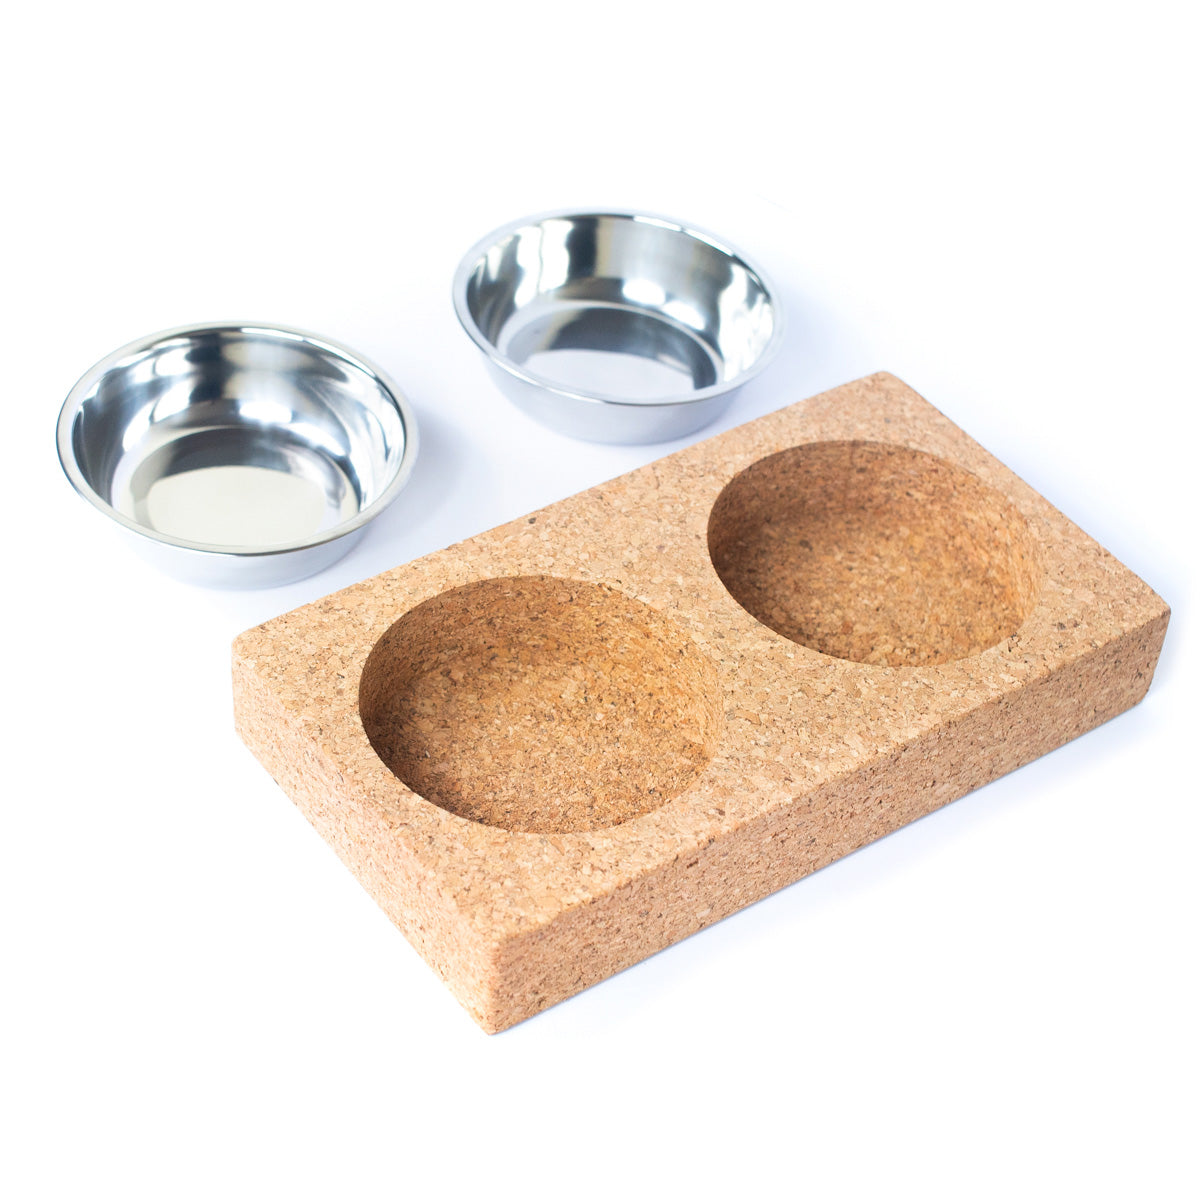 Cork Base & Stainless Steel Double Bowl Pet Food Dish | THE CORK COLLECTION